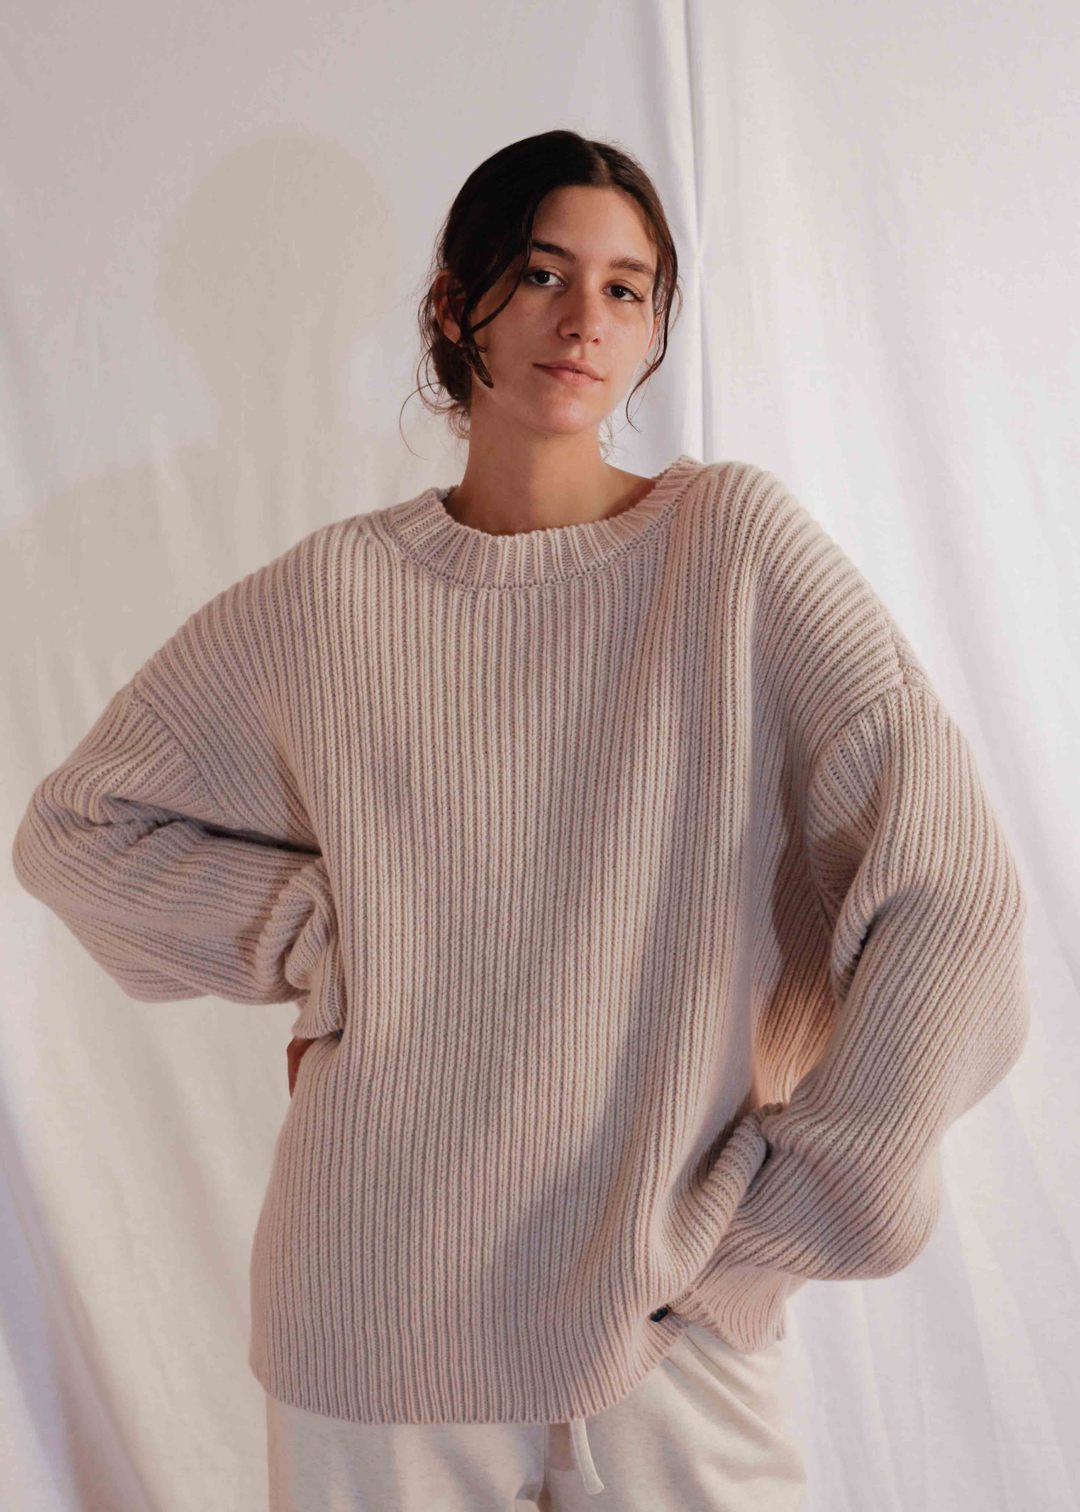 CHUNKY UNISEX KNIT PULLOVER IN OFF-WHITE BY CAN PEP REY